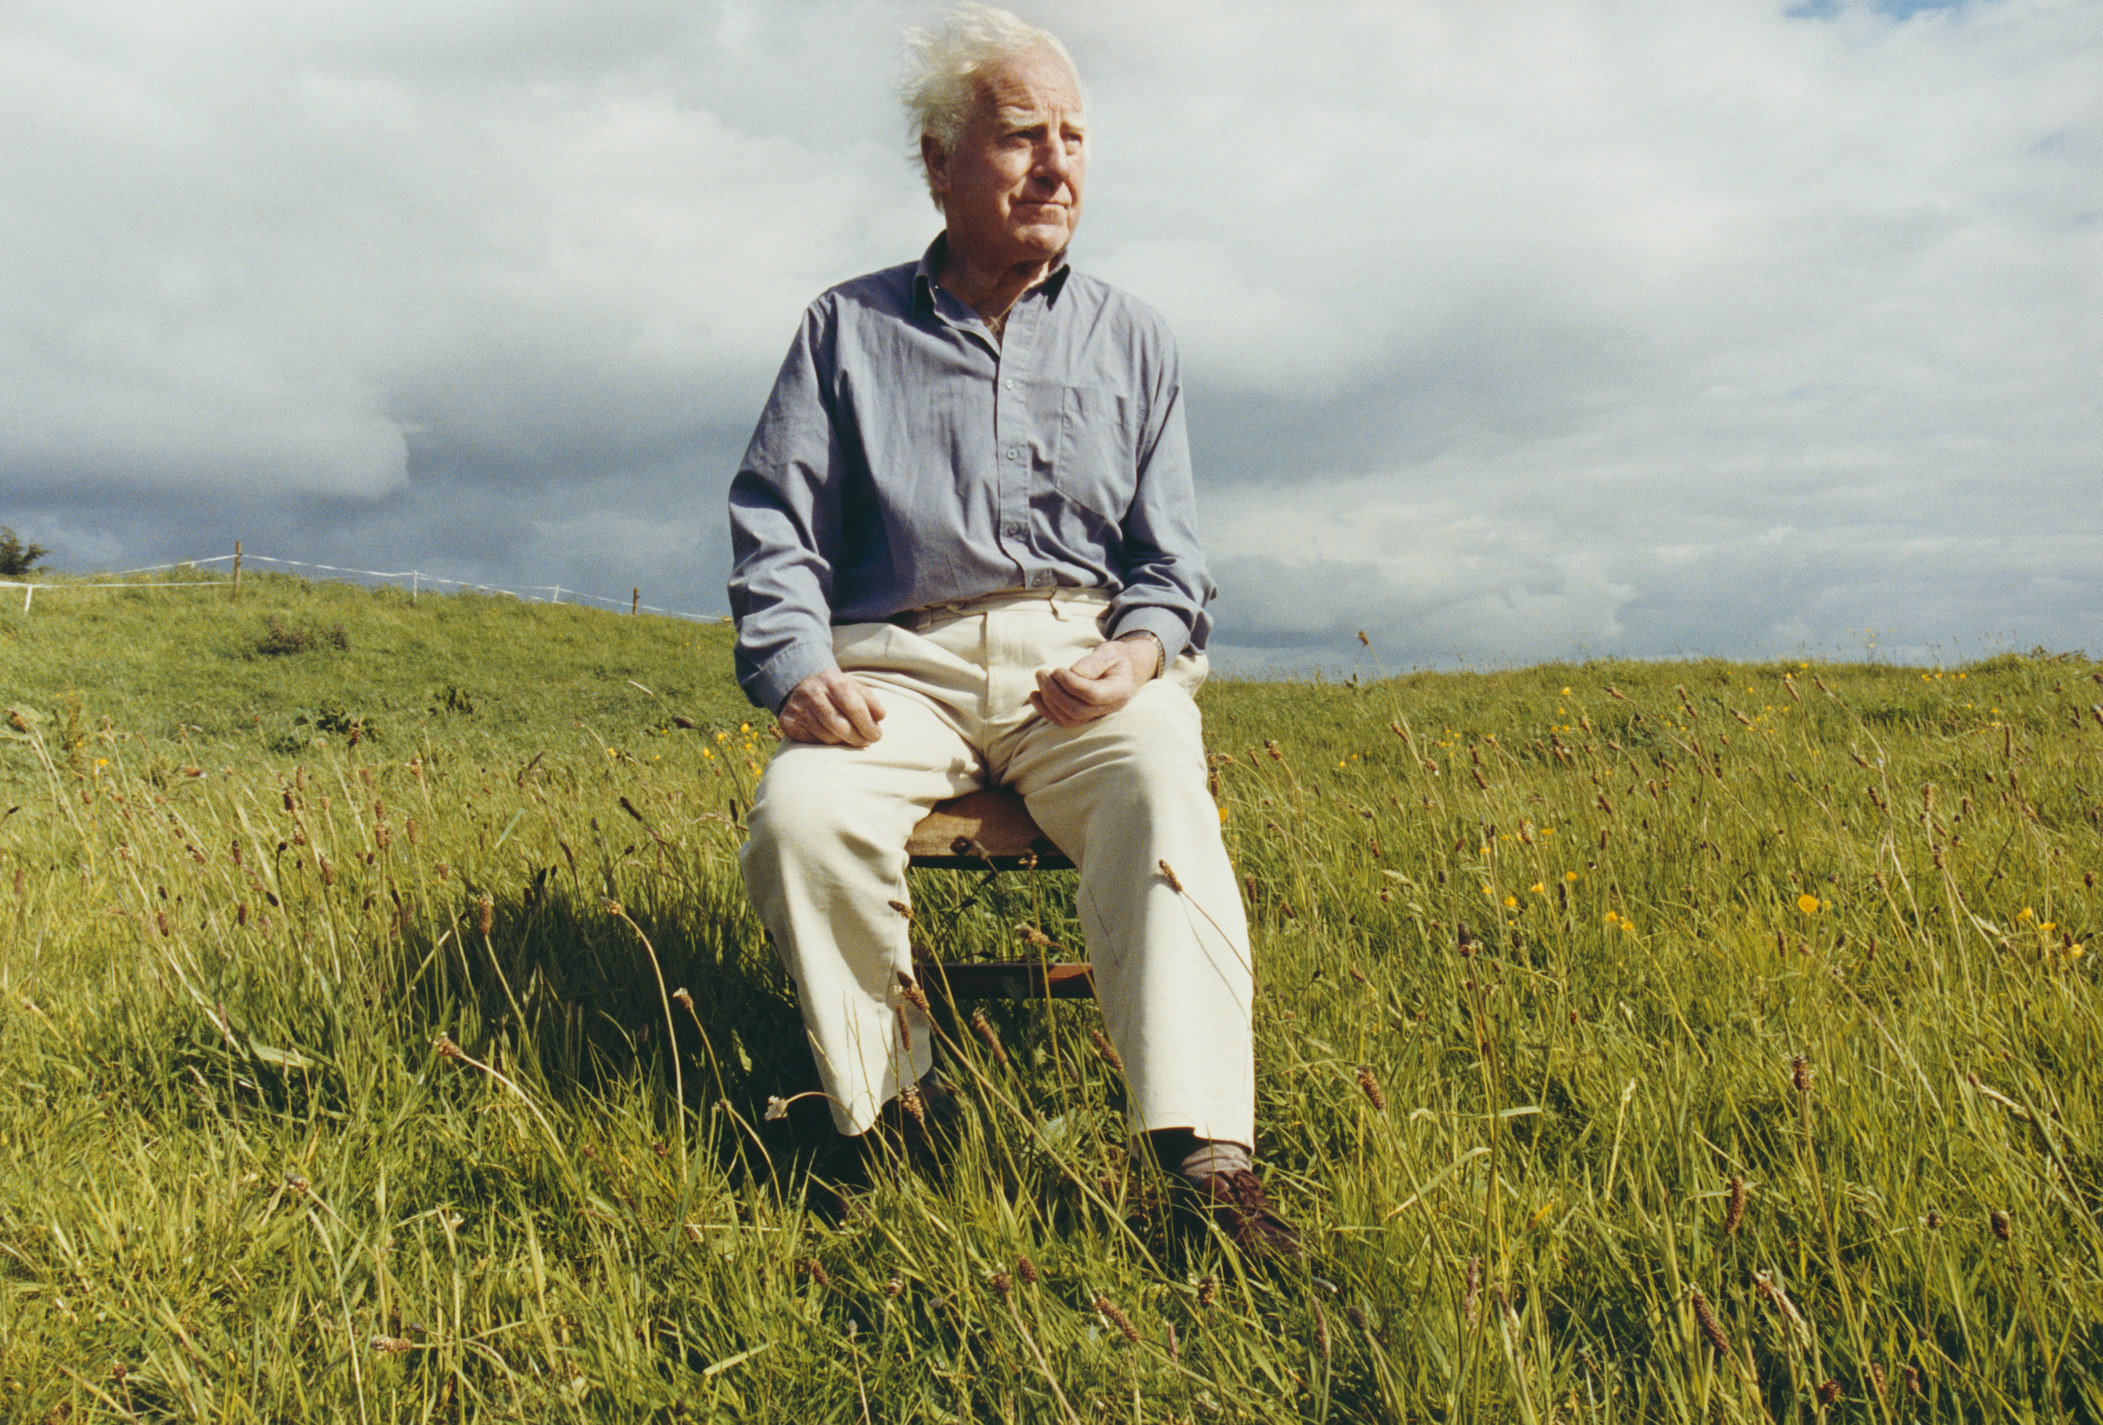 An elderly man with white hair sits in the middle of a green field